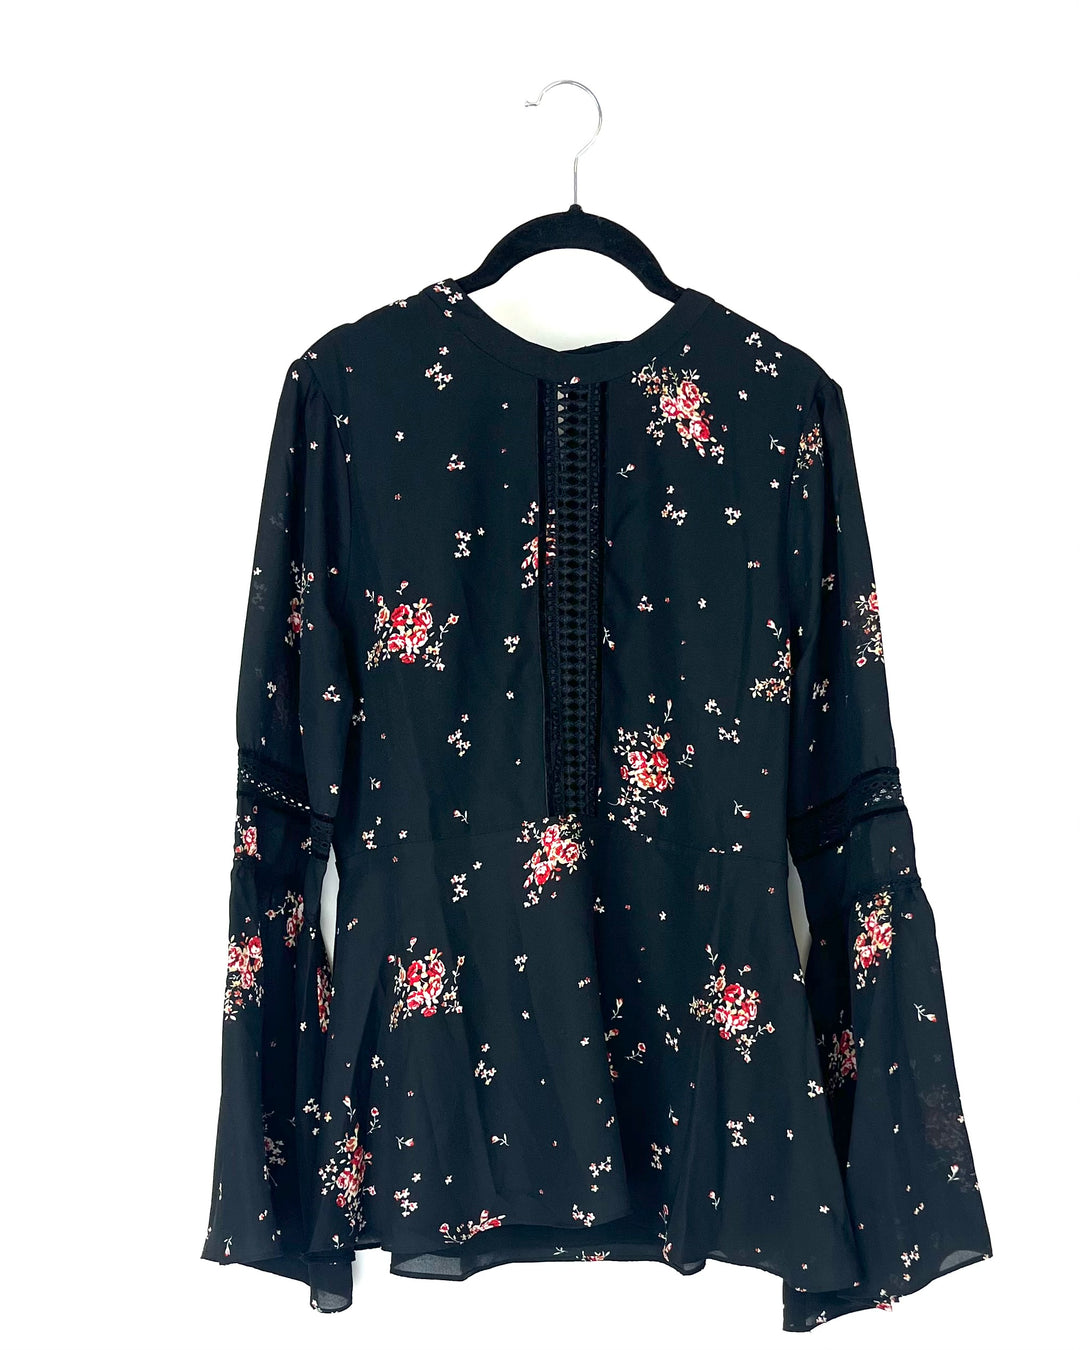 Black Floral Flowy Top - Extra Small, Small